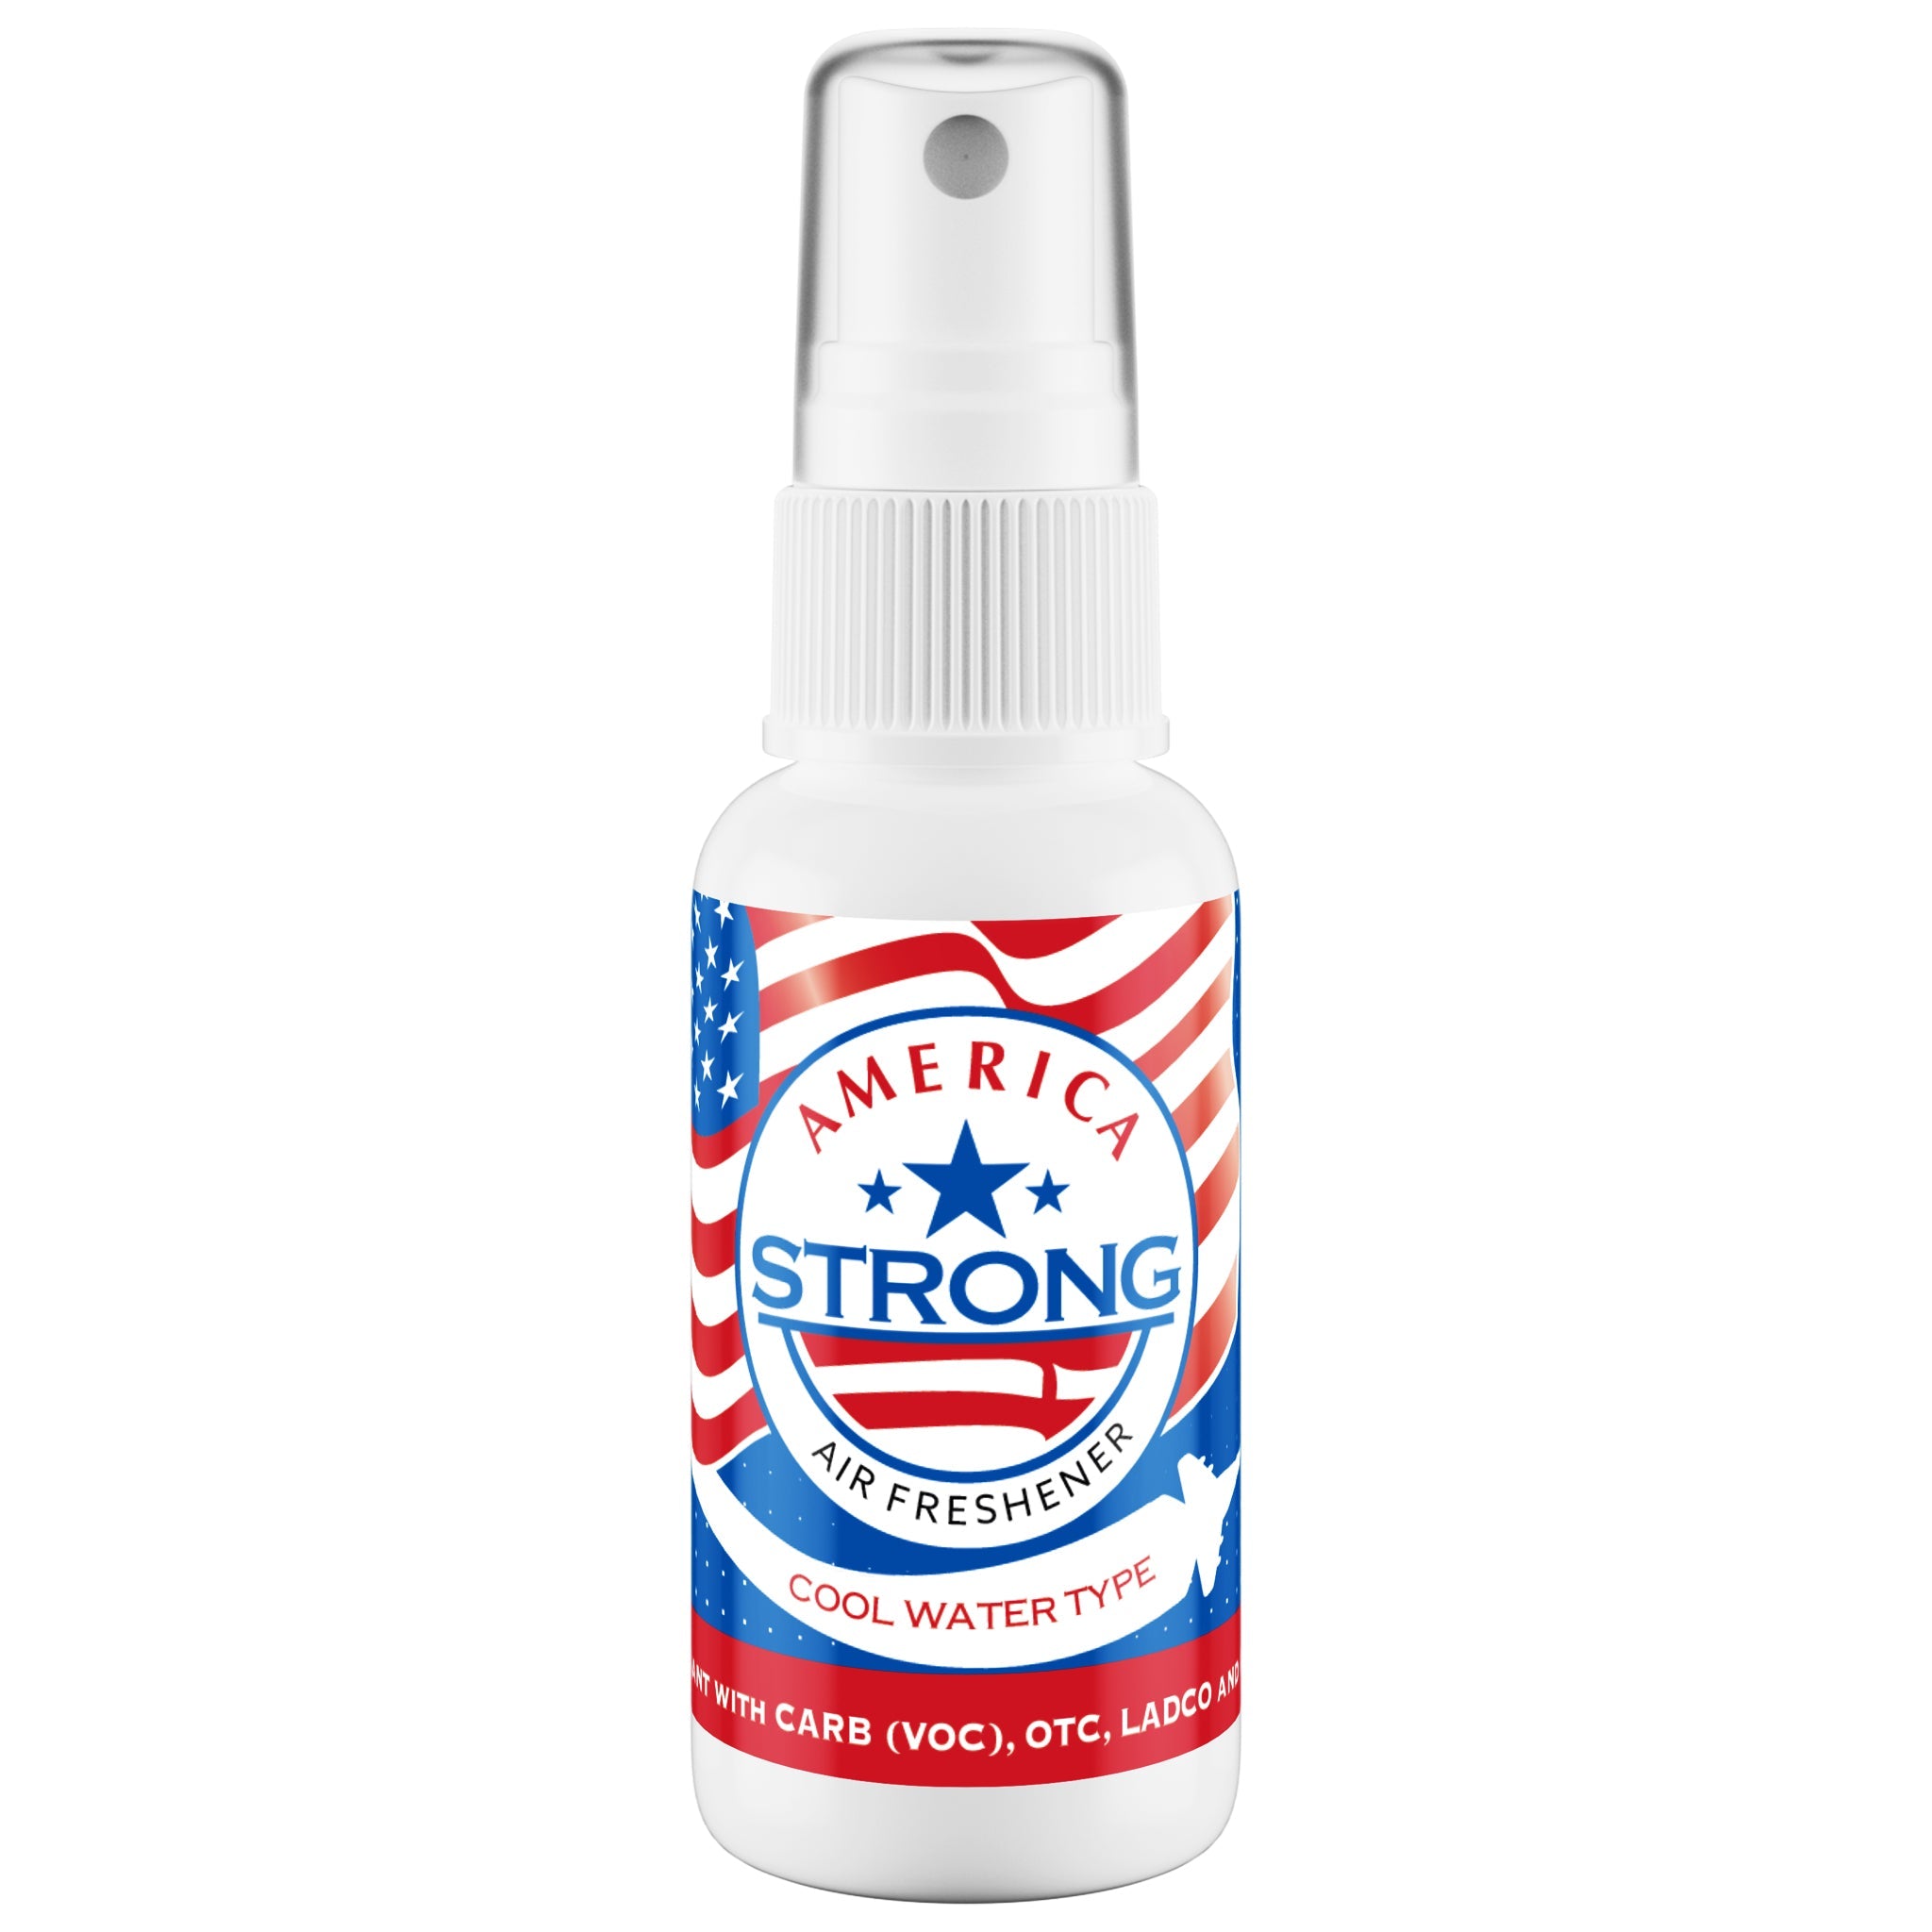 America Strong Air Freshener - Cool Water Scent